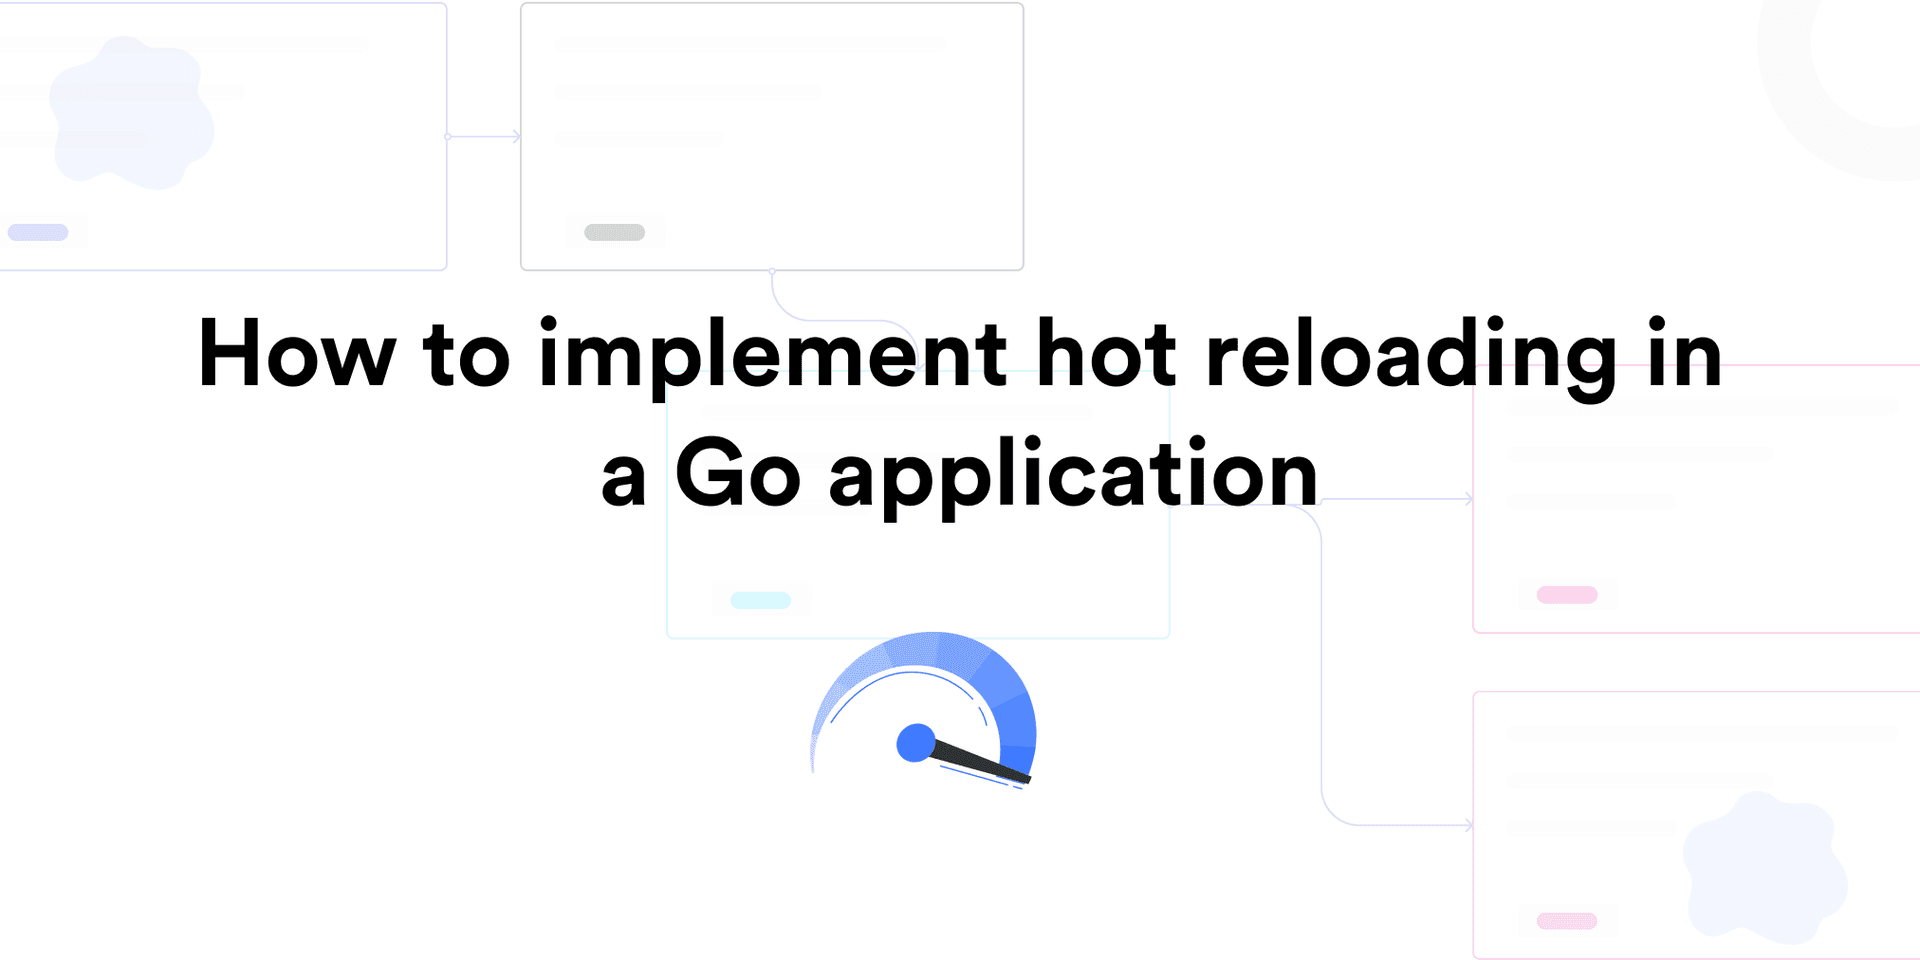 How to implement hot reloading in a Go application's image